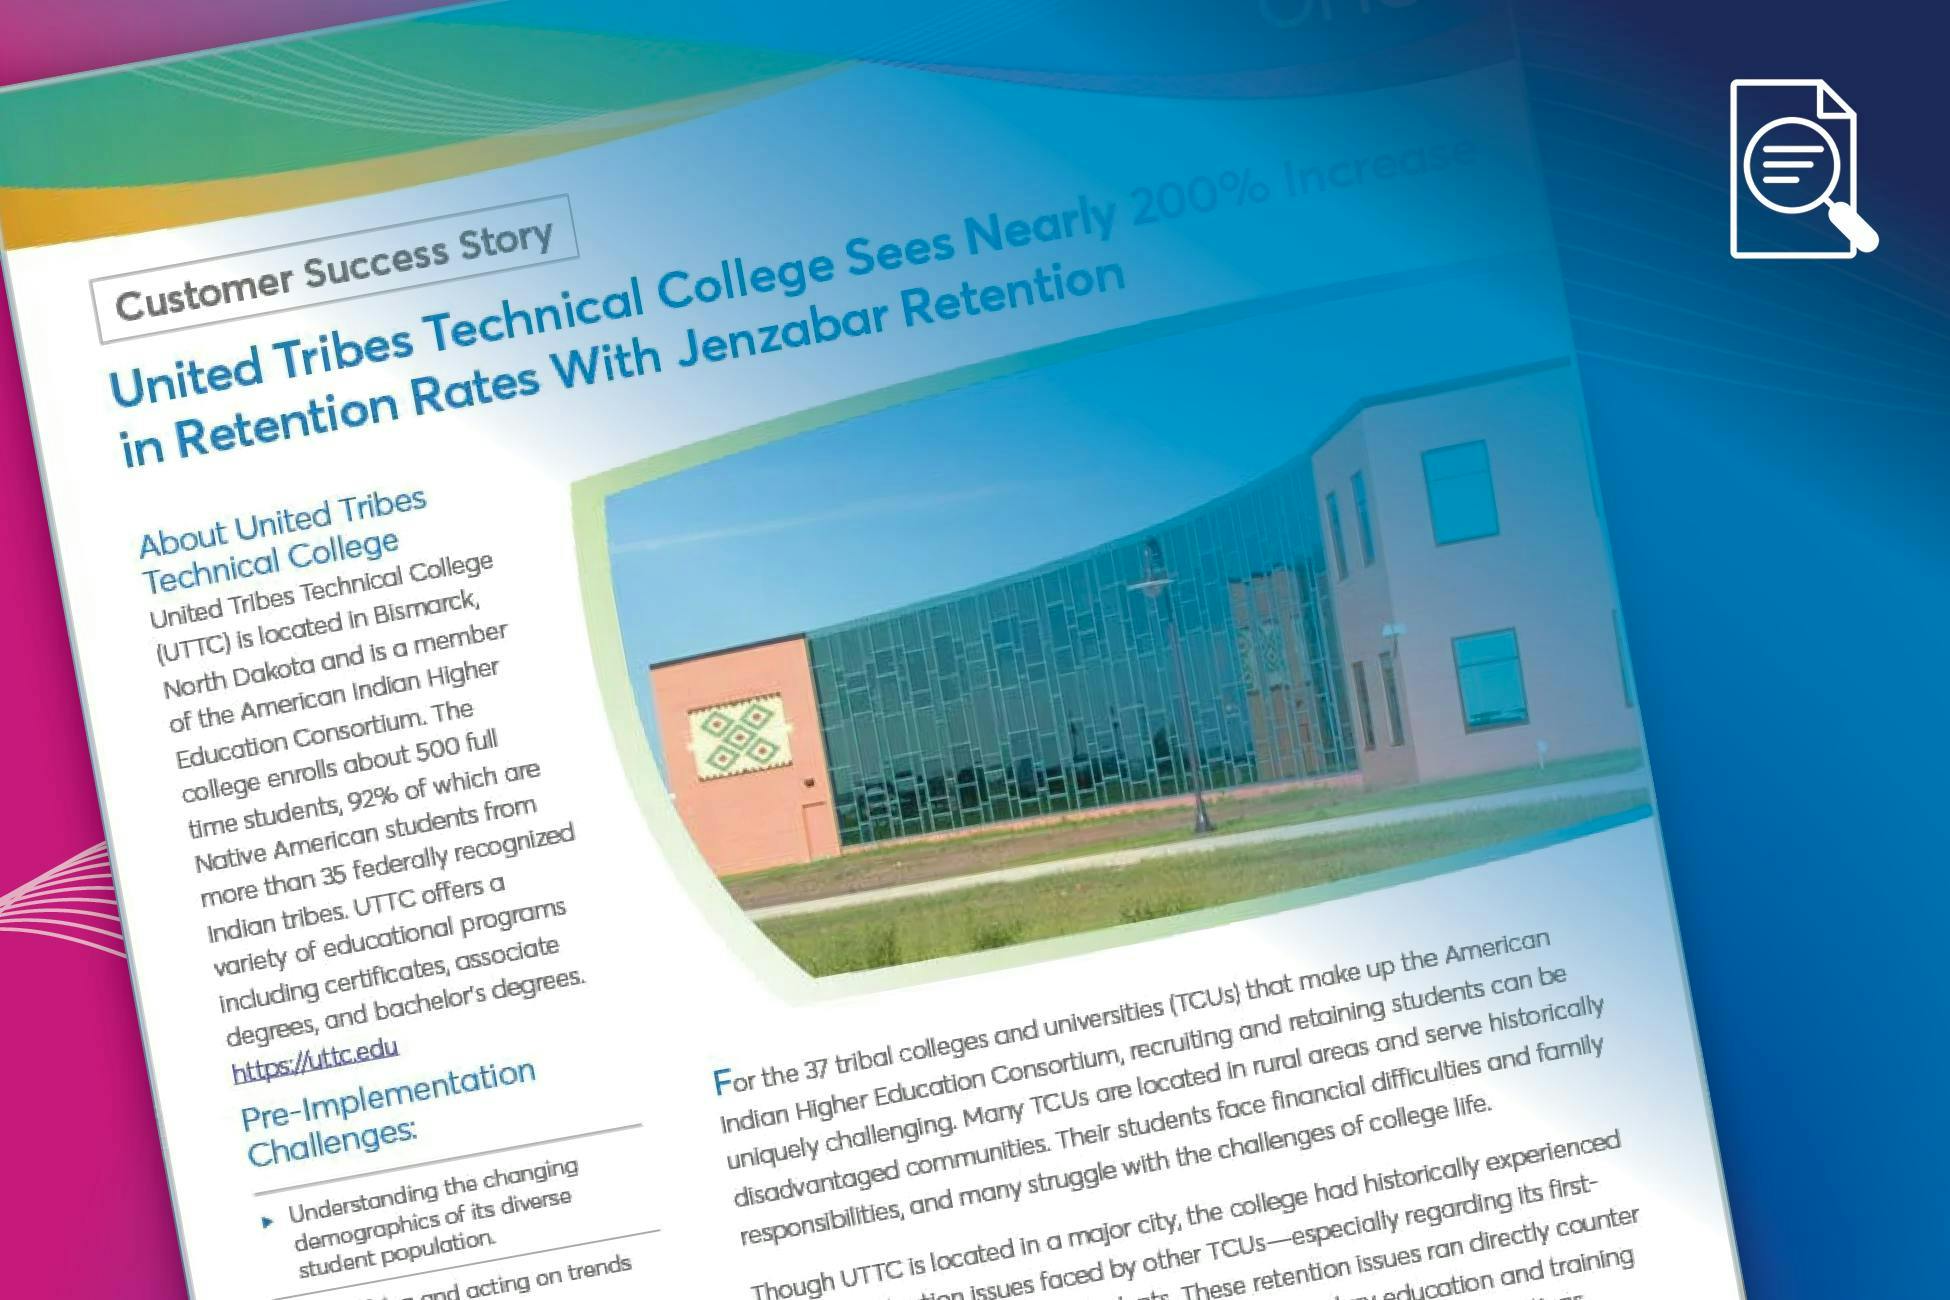 Case Study: UTTC United Tribes Technical College